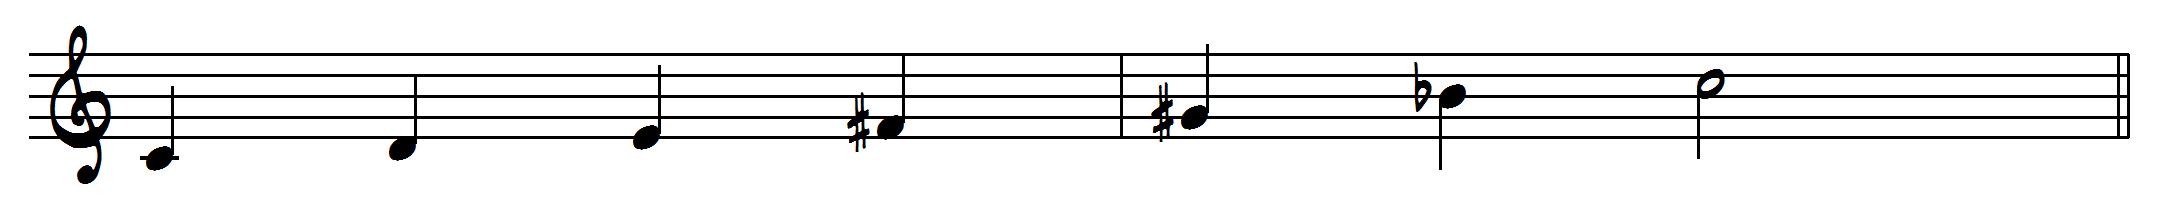 jazz scales: Whole Tone scale